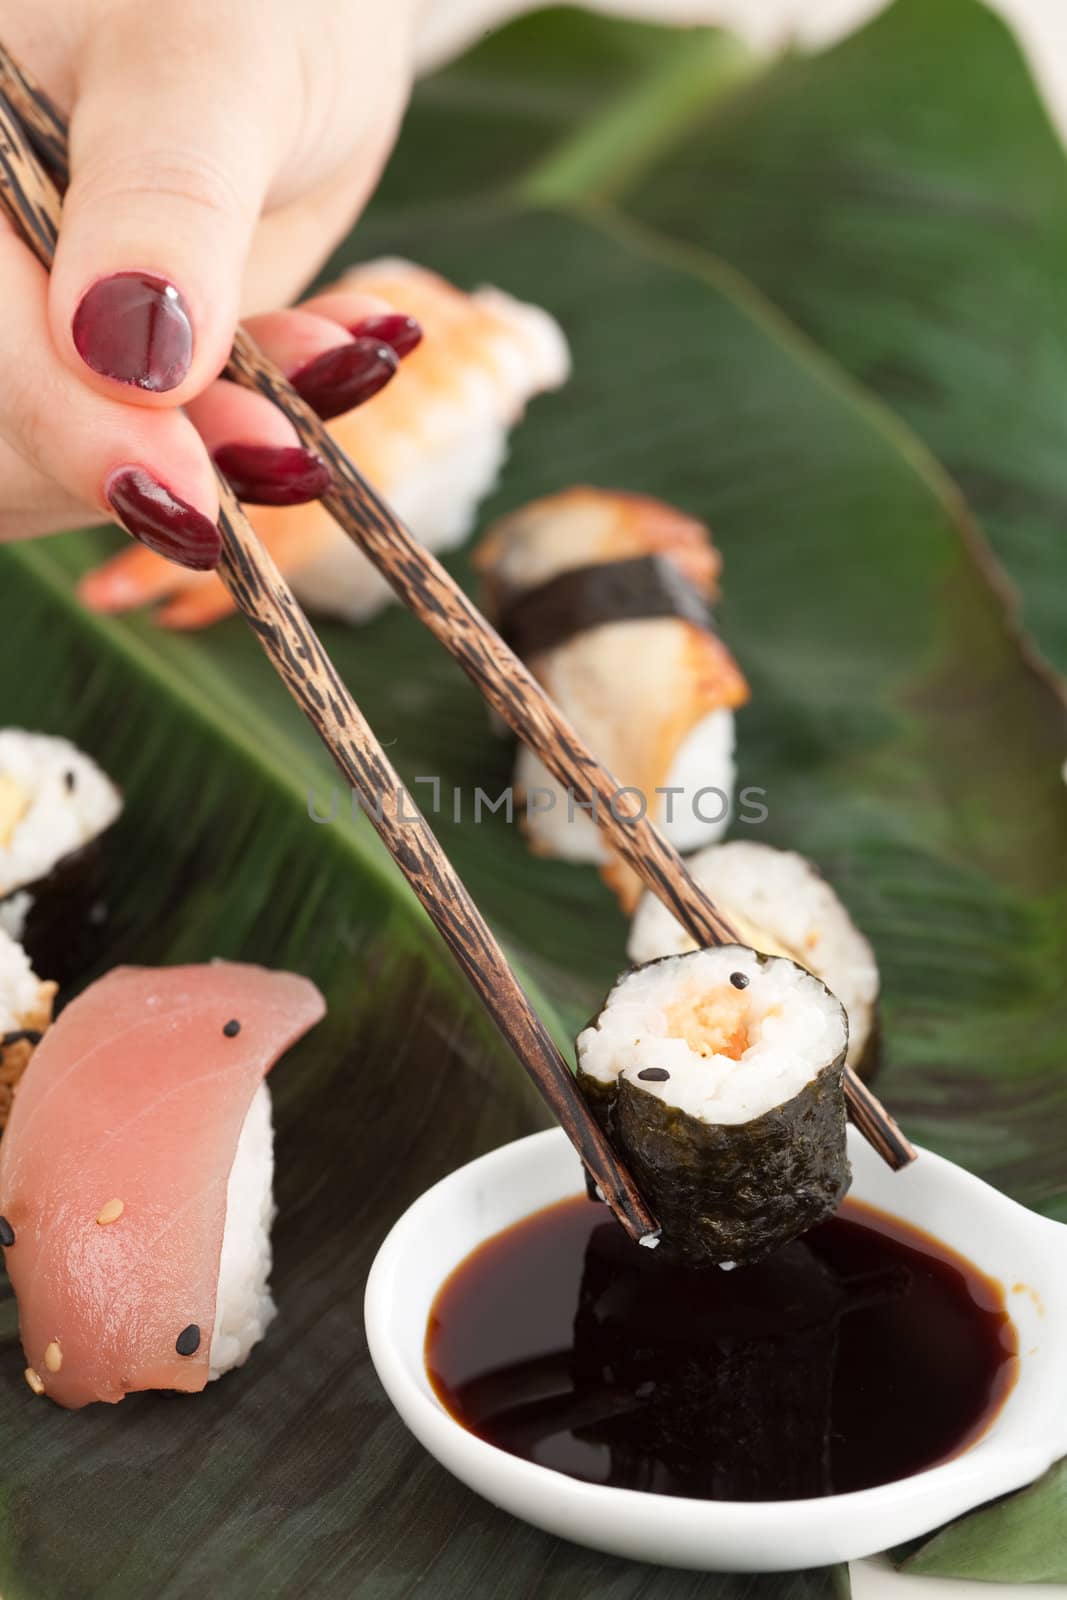 Woman hand with red fingernails holding chopstick to dip a sushi in the soy sauce